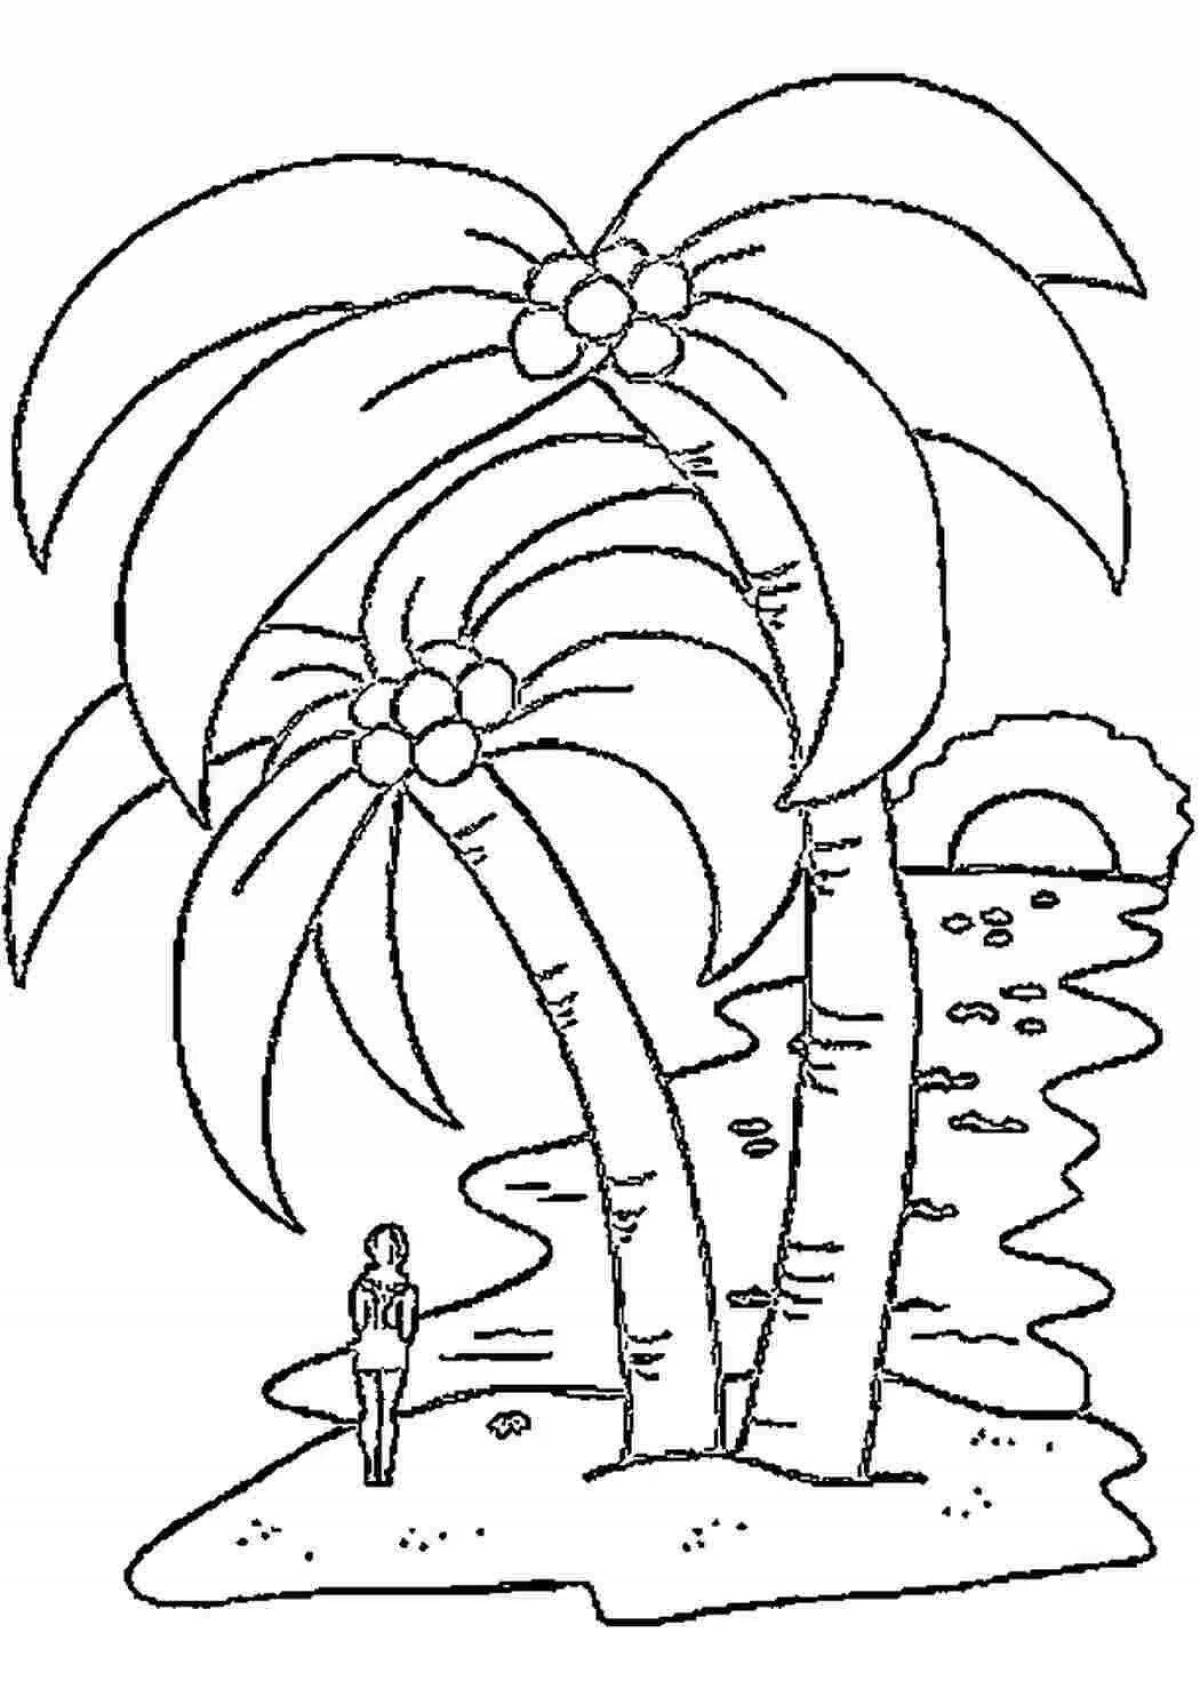 Sunny island coloring book for kids